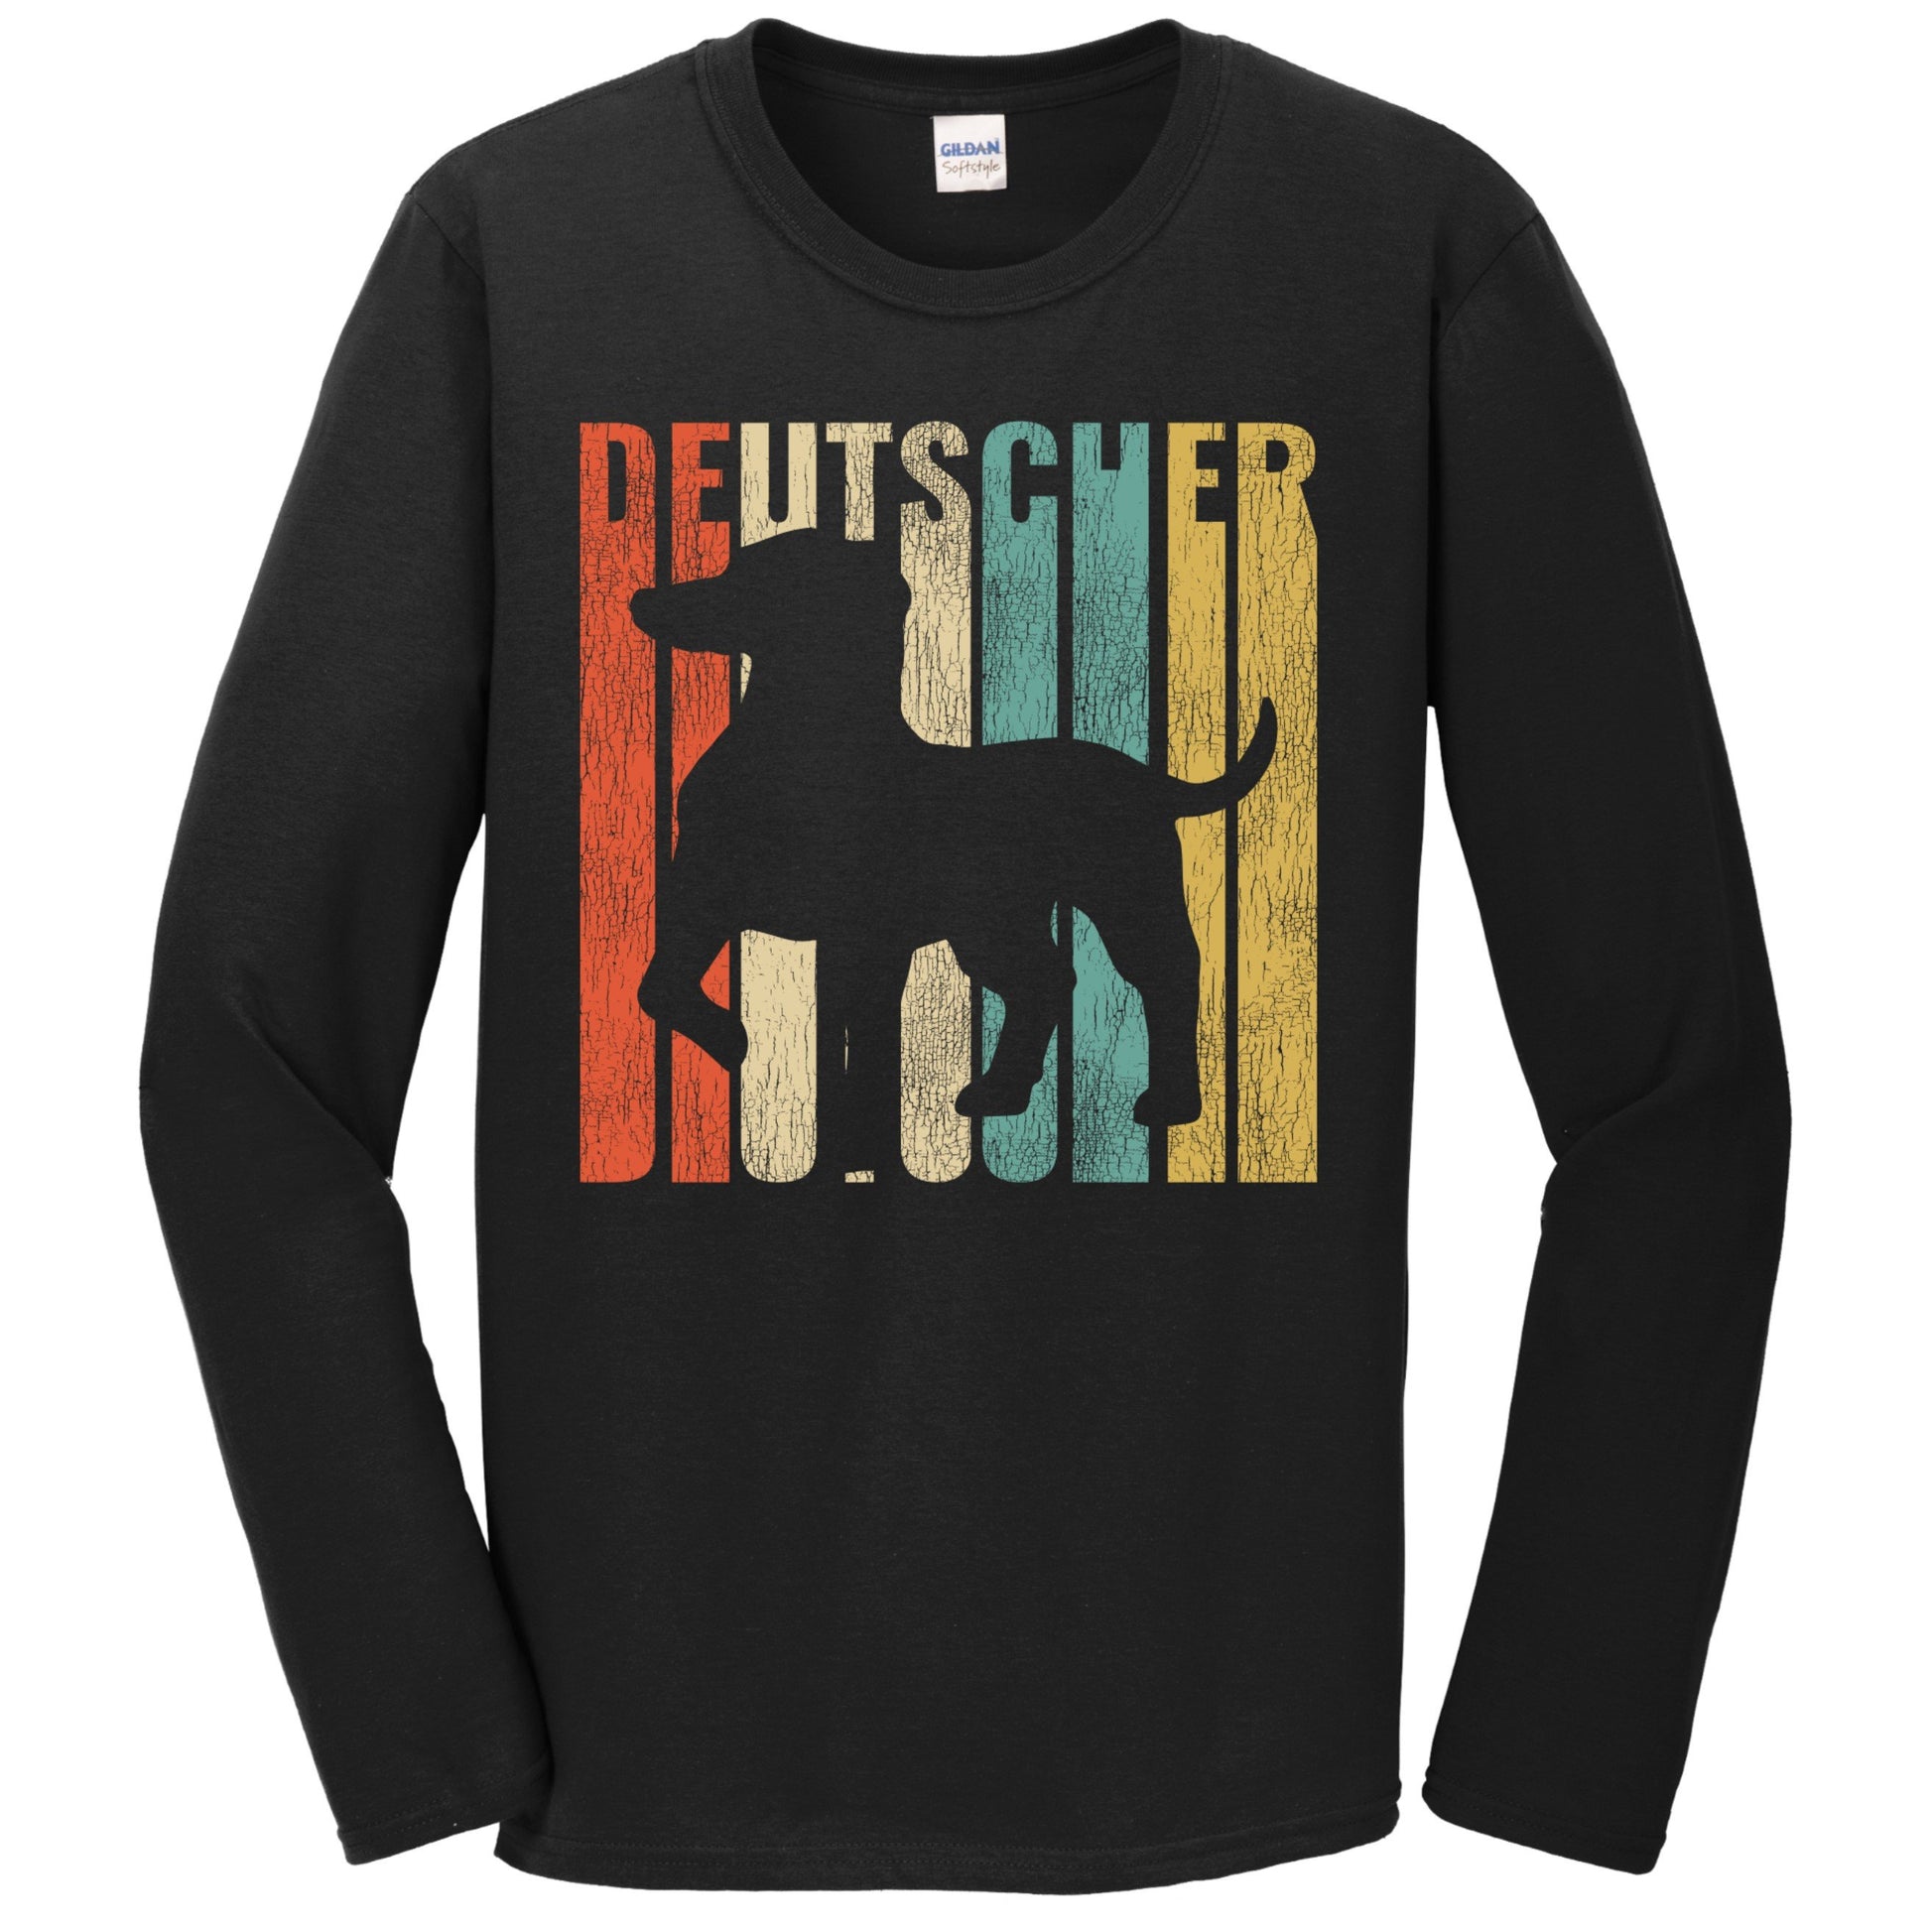 Retro 1970's Style Deutscher Dog Silhouette German Shorthaired Pointer Cracked Distressed Long Sleeve T-Shirt